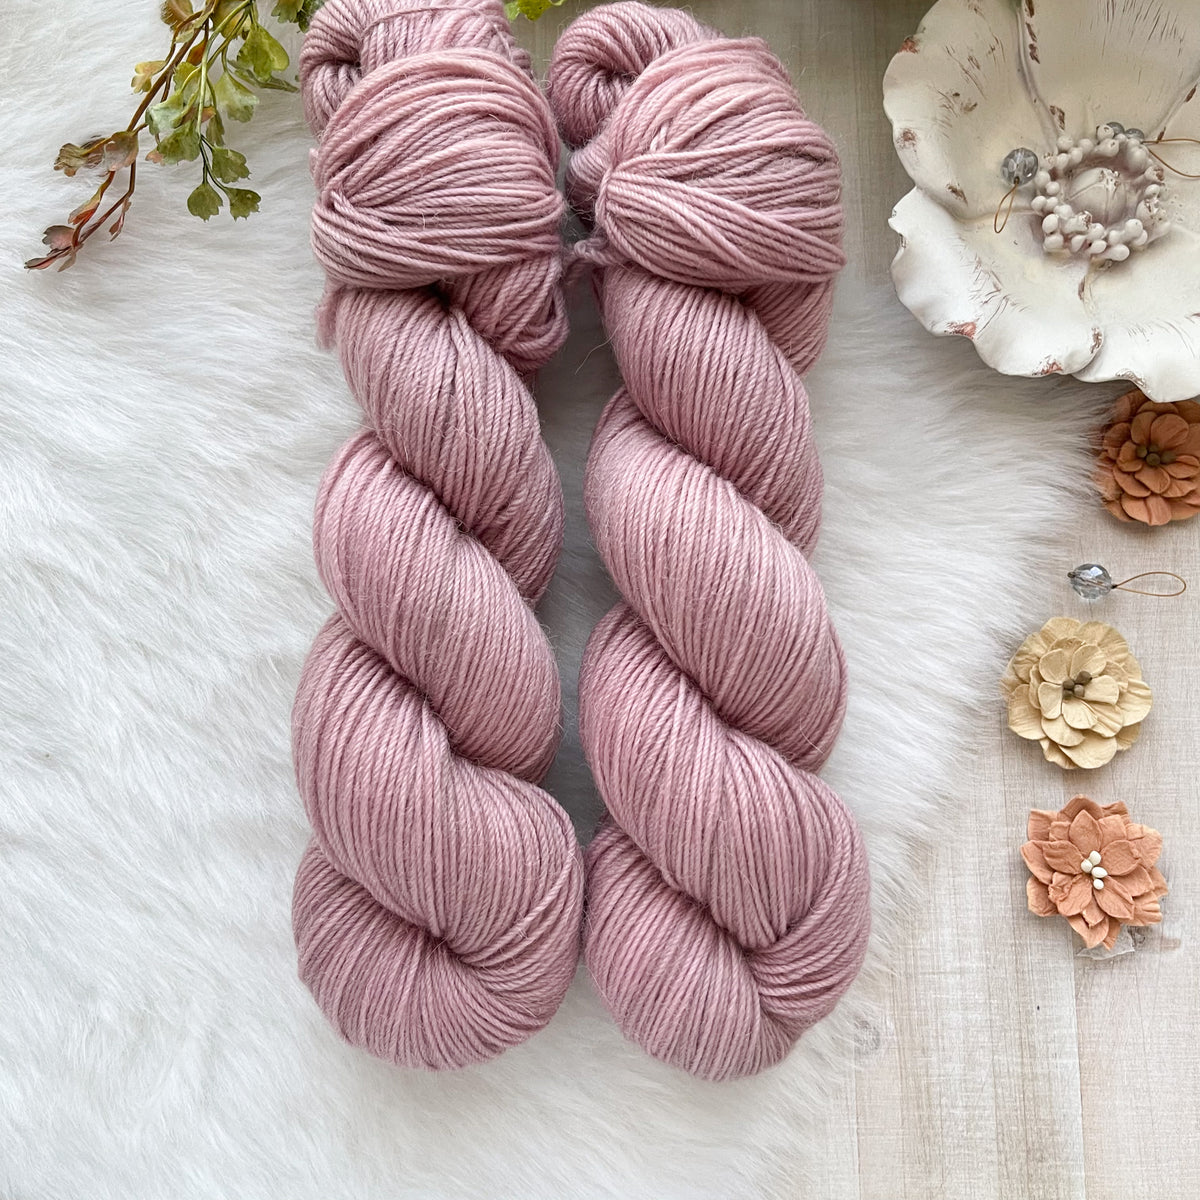 DUSTY ROSE - Dyed to Order - Dreamy Base Handdyed Yarn